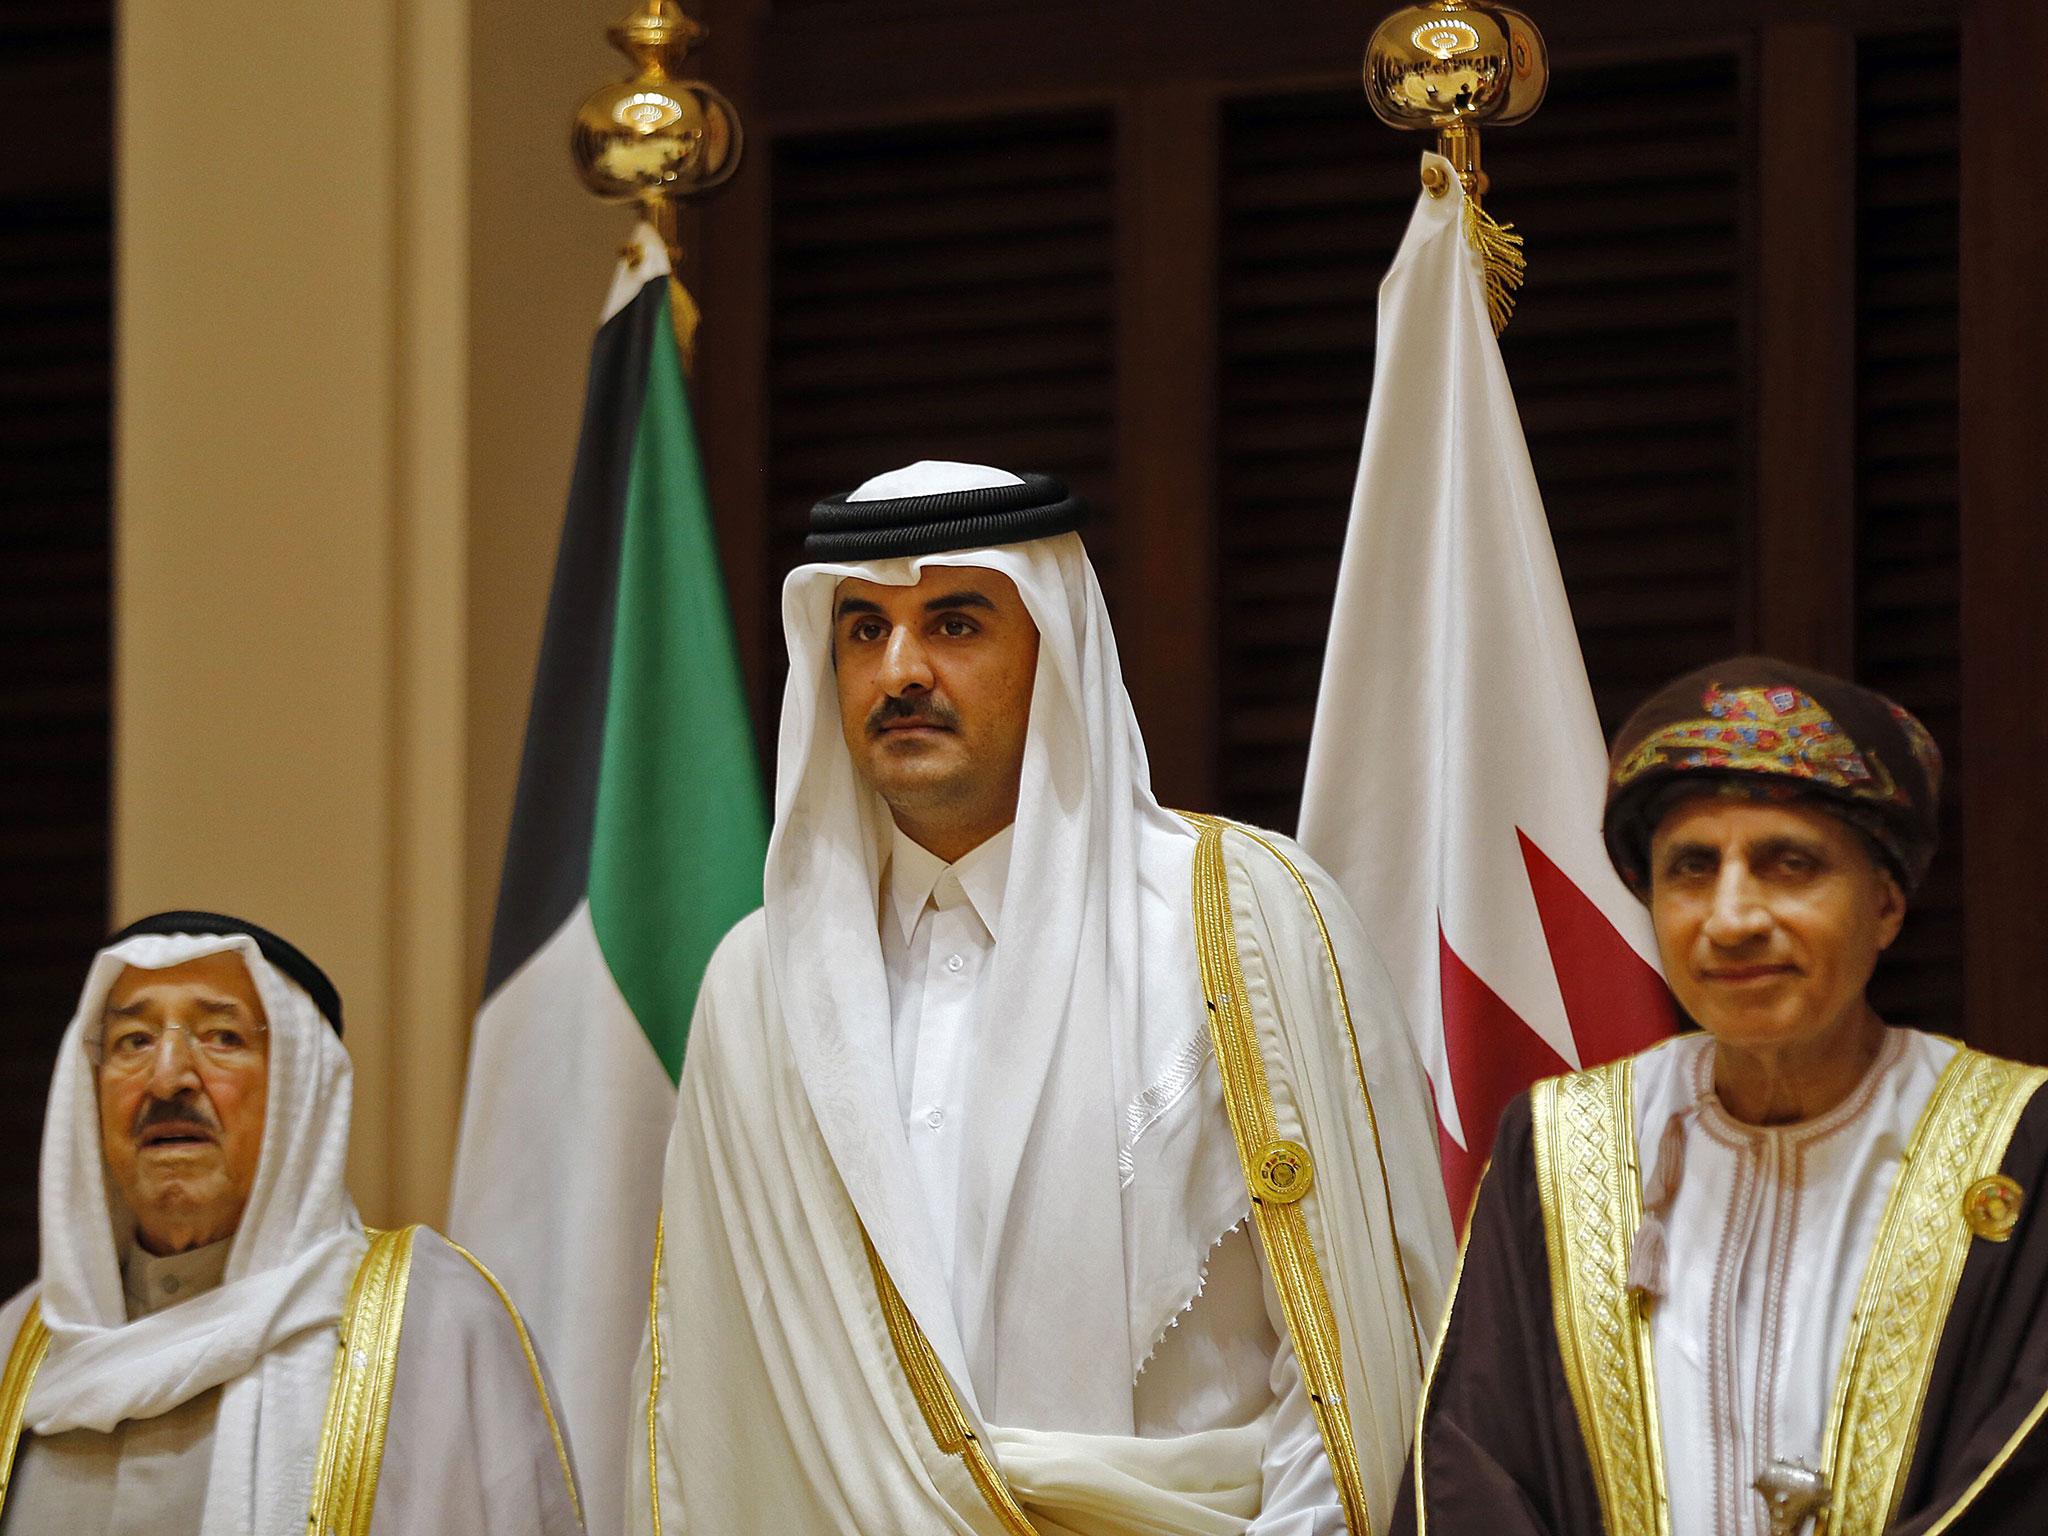 Tamim bin Hamad Al Thani (centre), the Emir of Qatar, has been buoyed by messages of support from the US